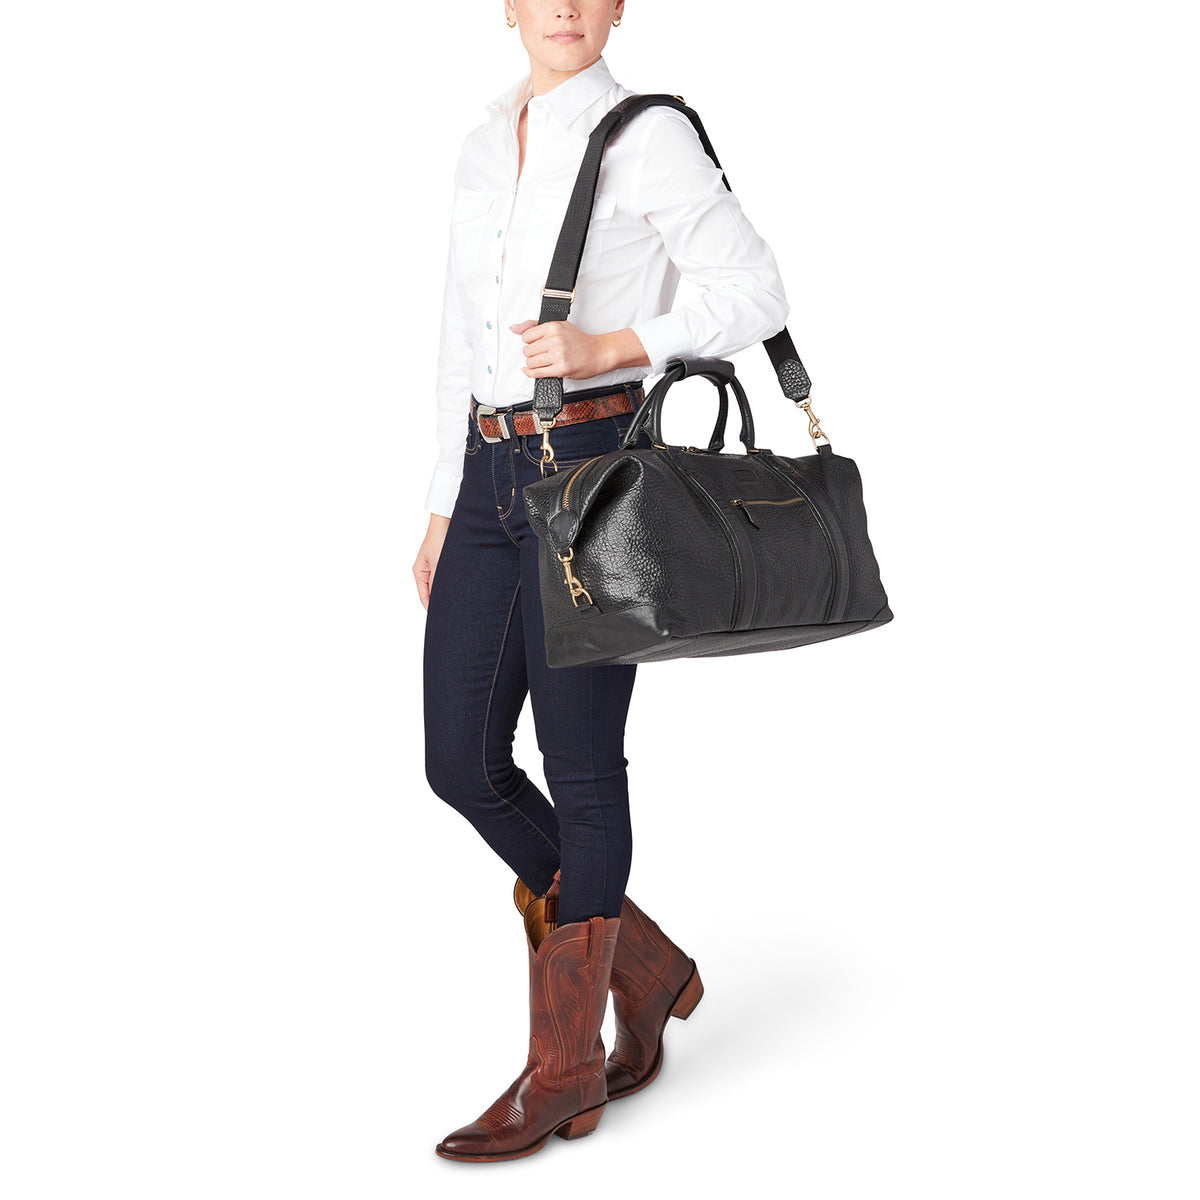 Shop All Travel and Bags - Lucchese